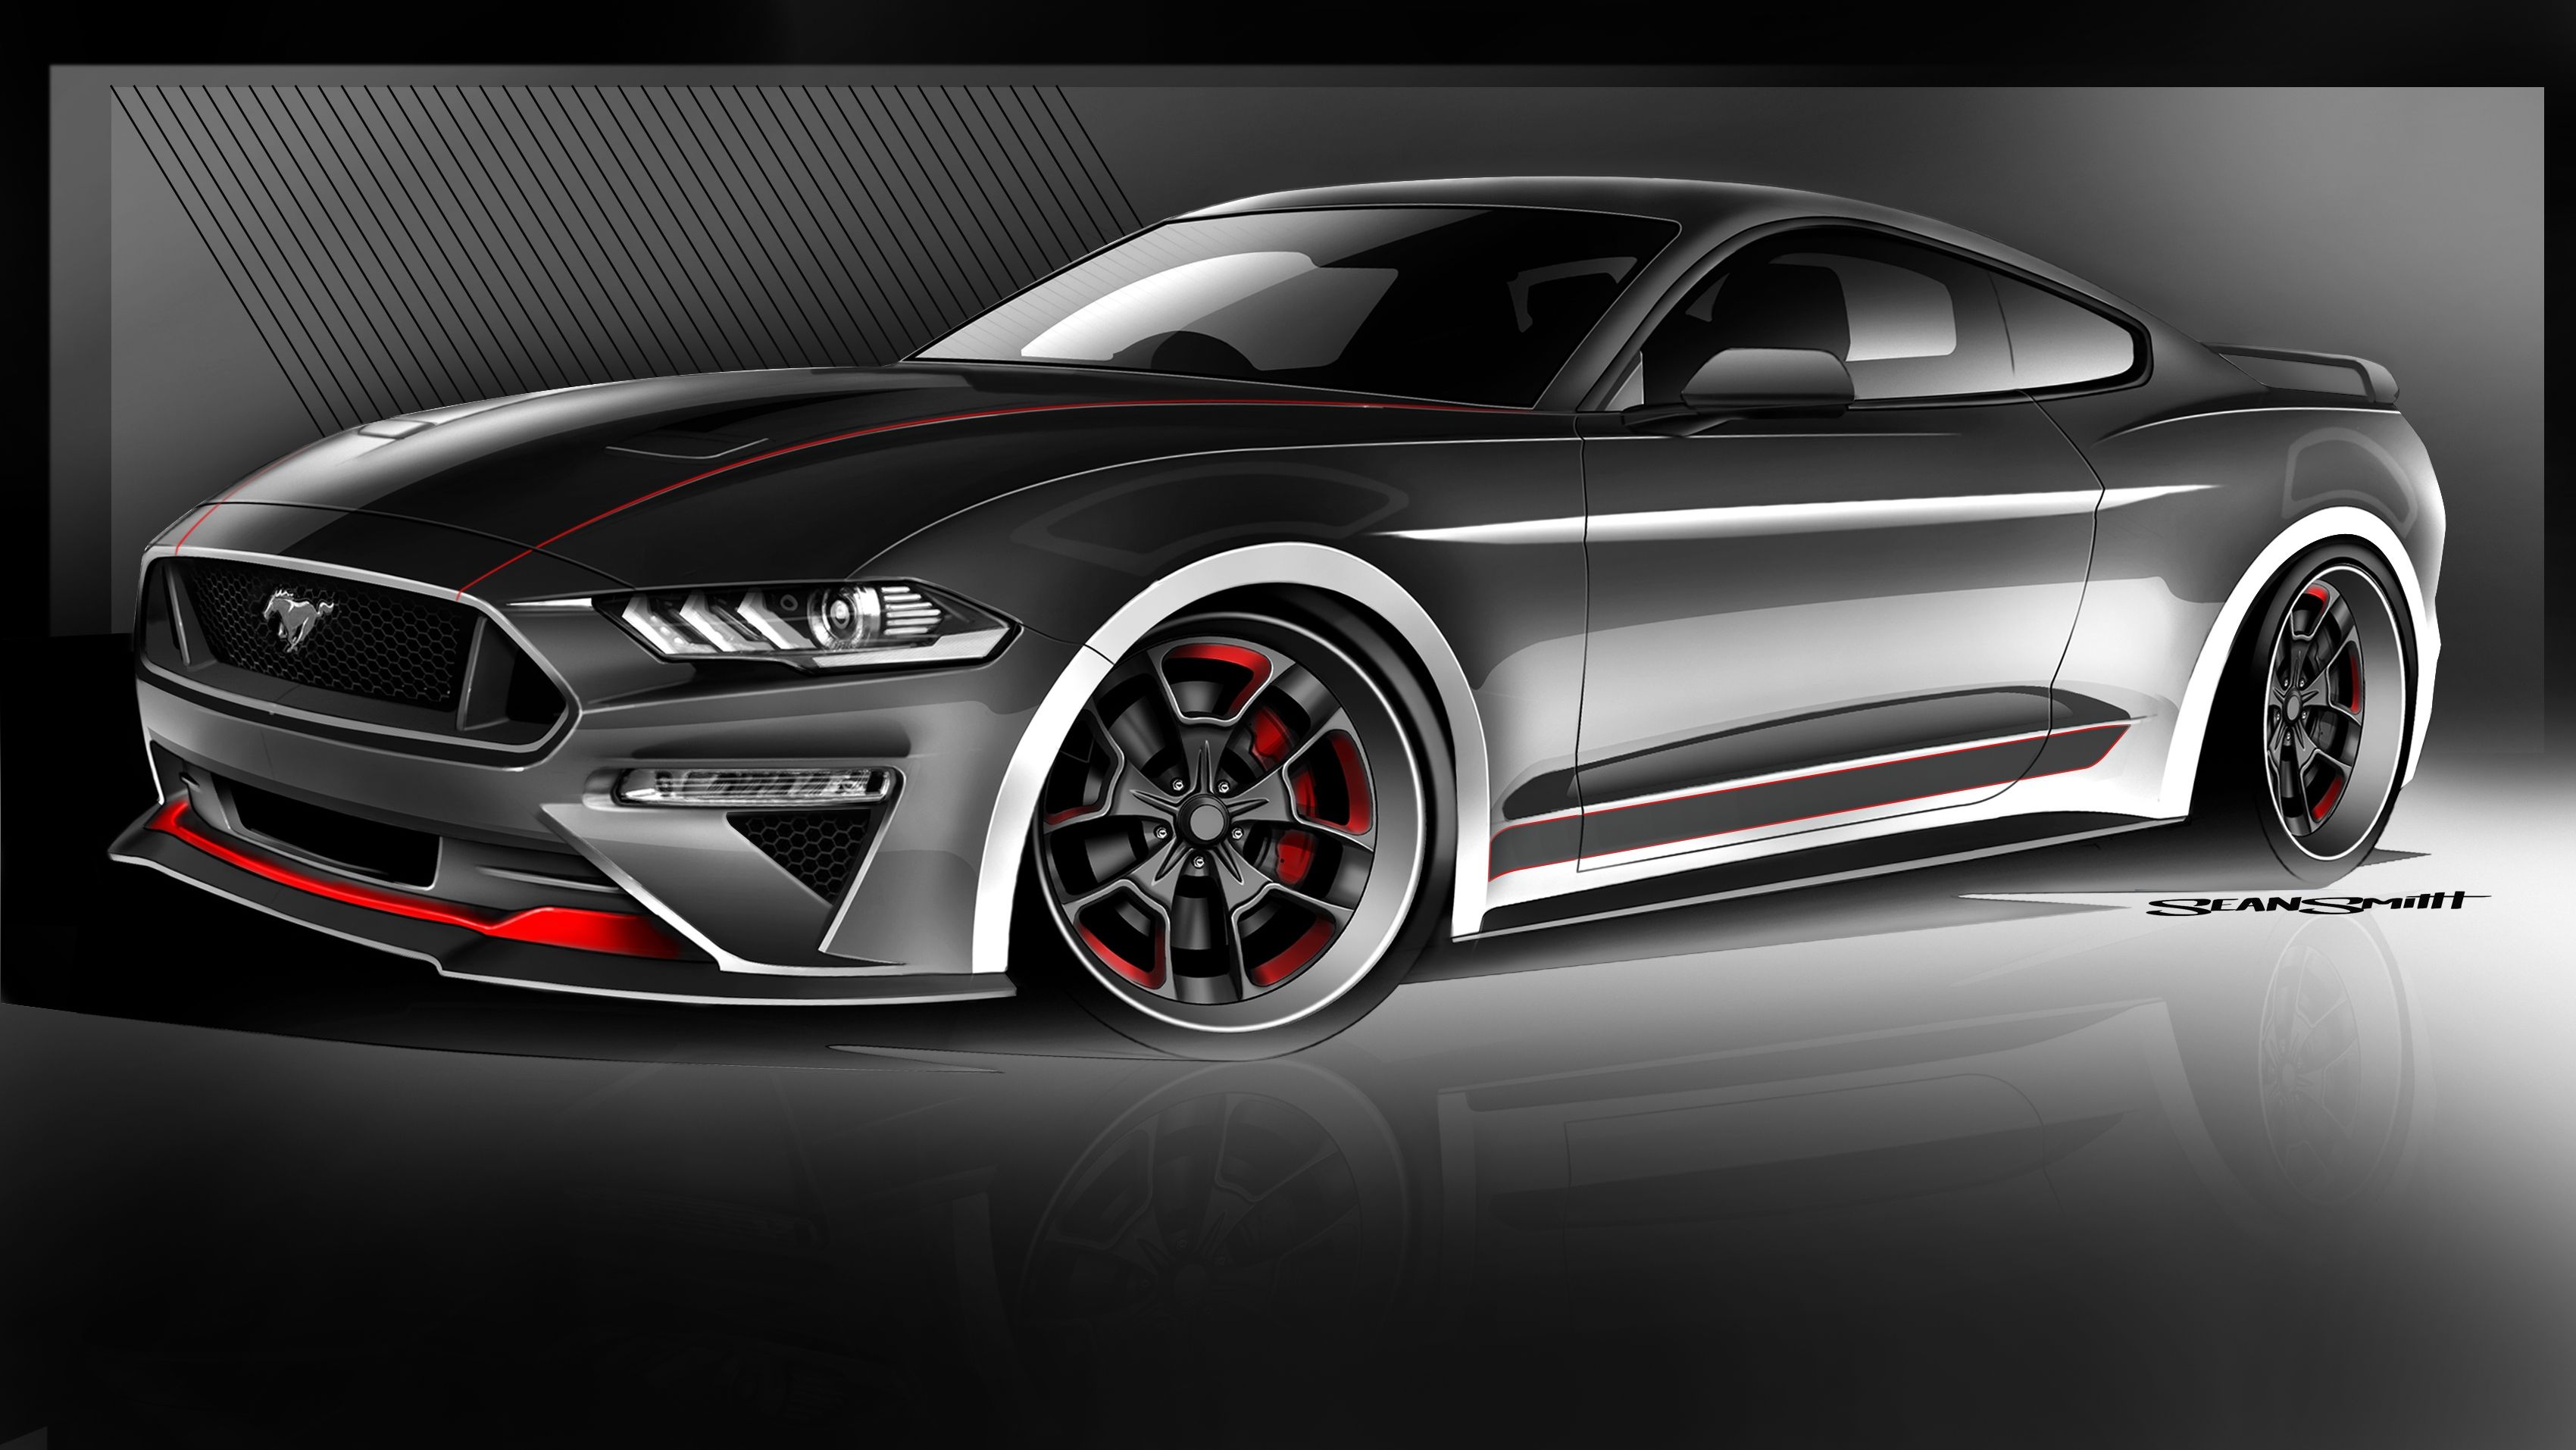 2018 Ford Mustang GT by CGS Motorsports